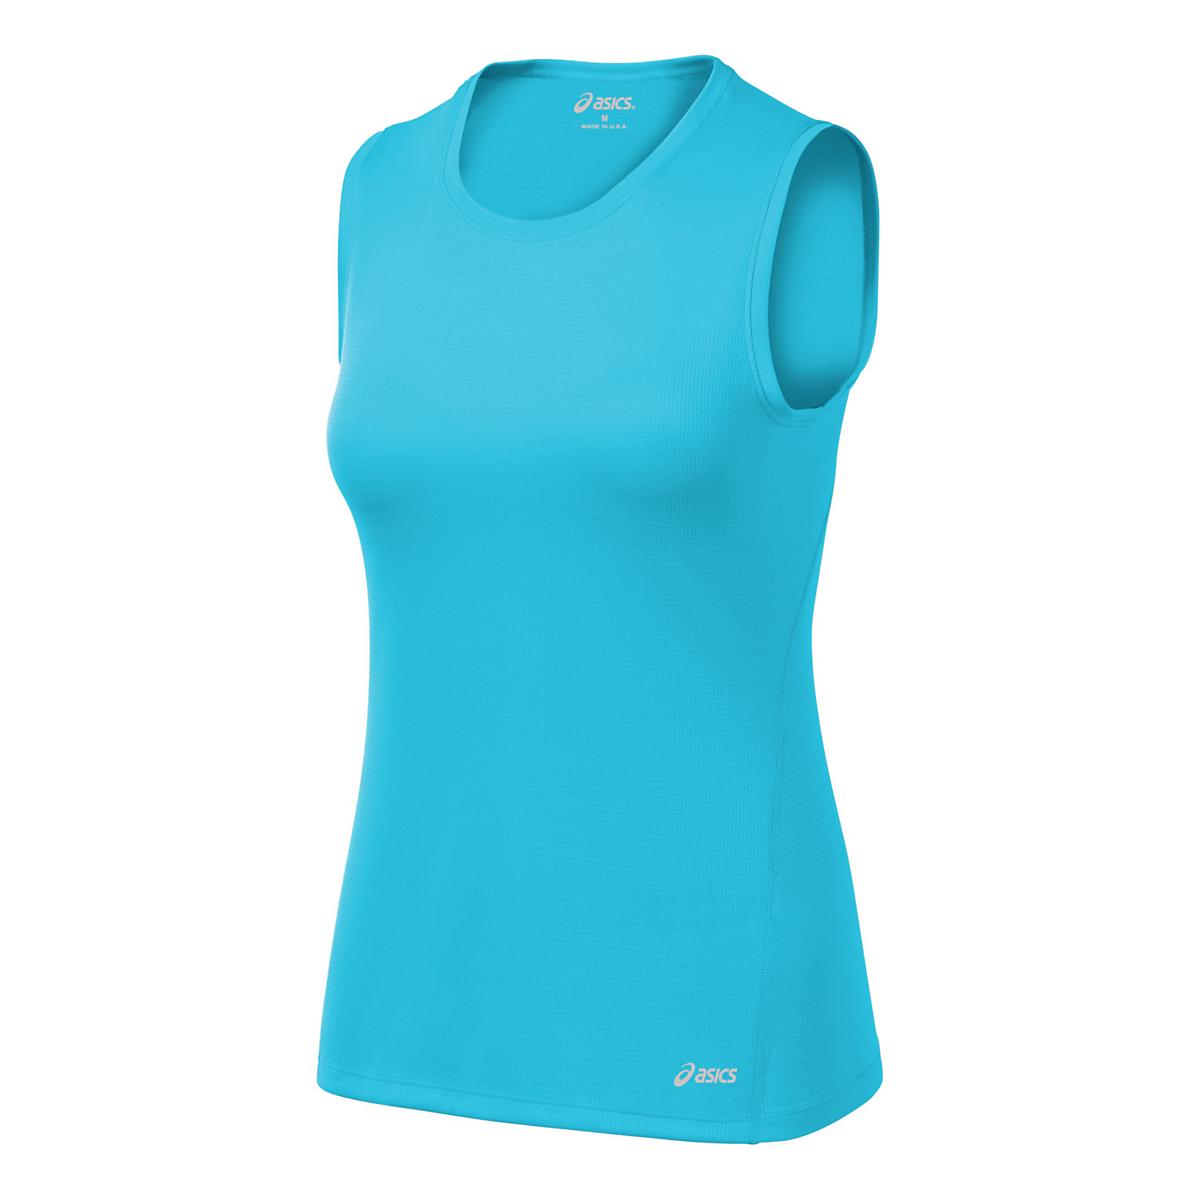 Womens ASICS Core Tanks Technical Tops at Road Runner Sports